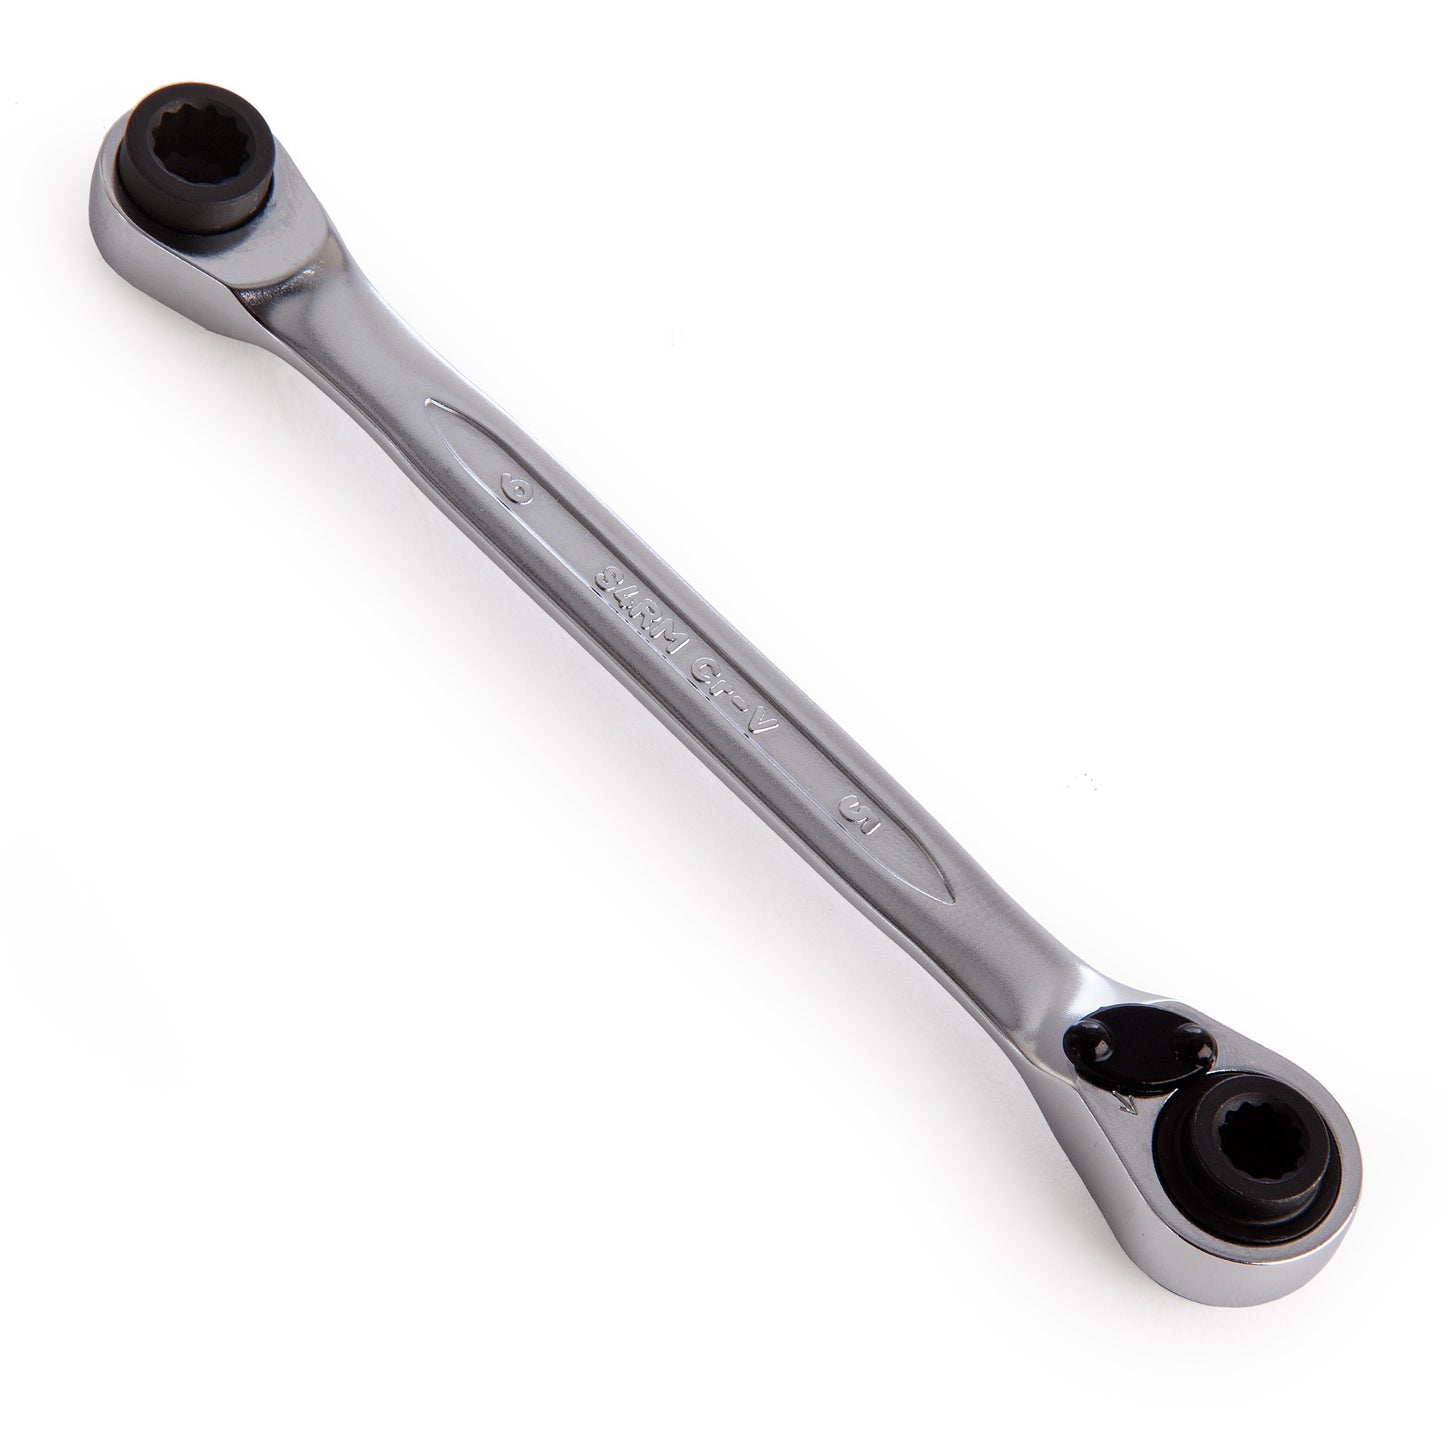 Bahco Spanner Reversible Ratchet Metric Sizes Include 12, 13, 14, 15mm S4RM-12-15